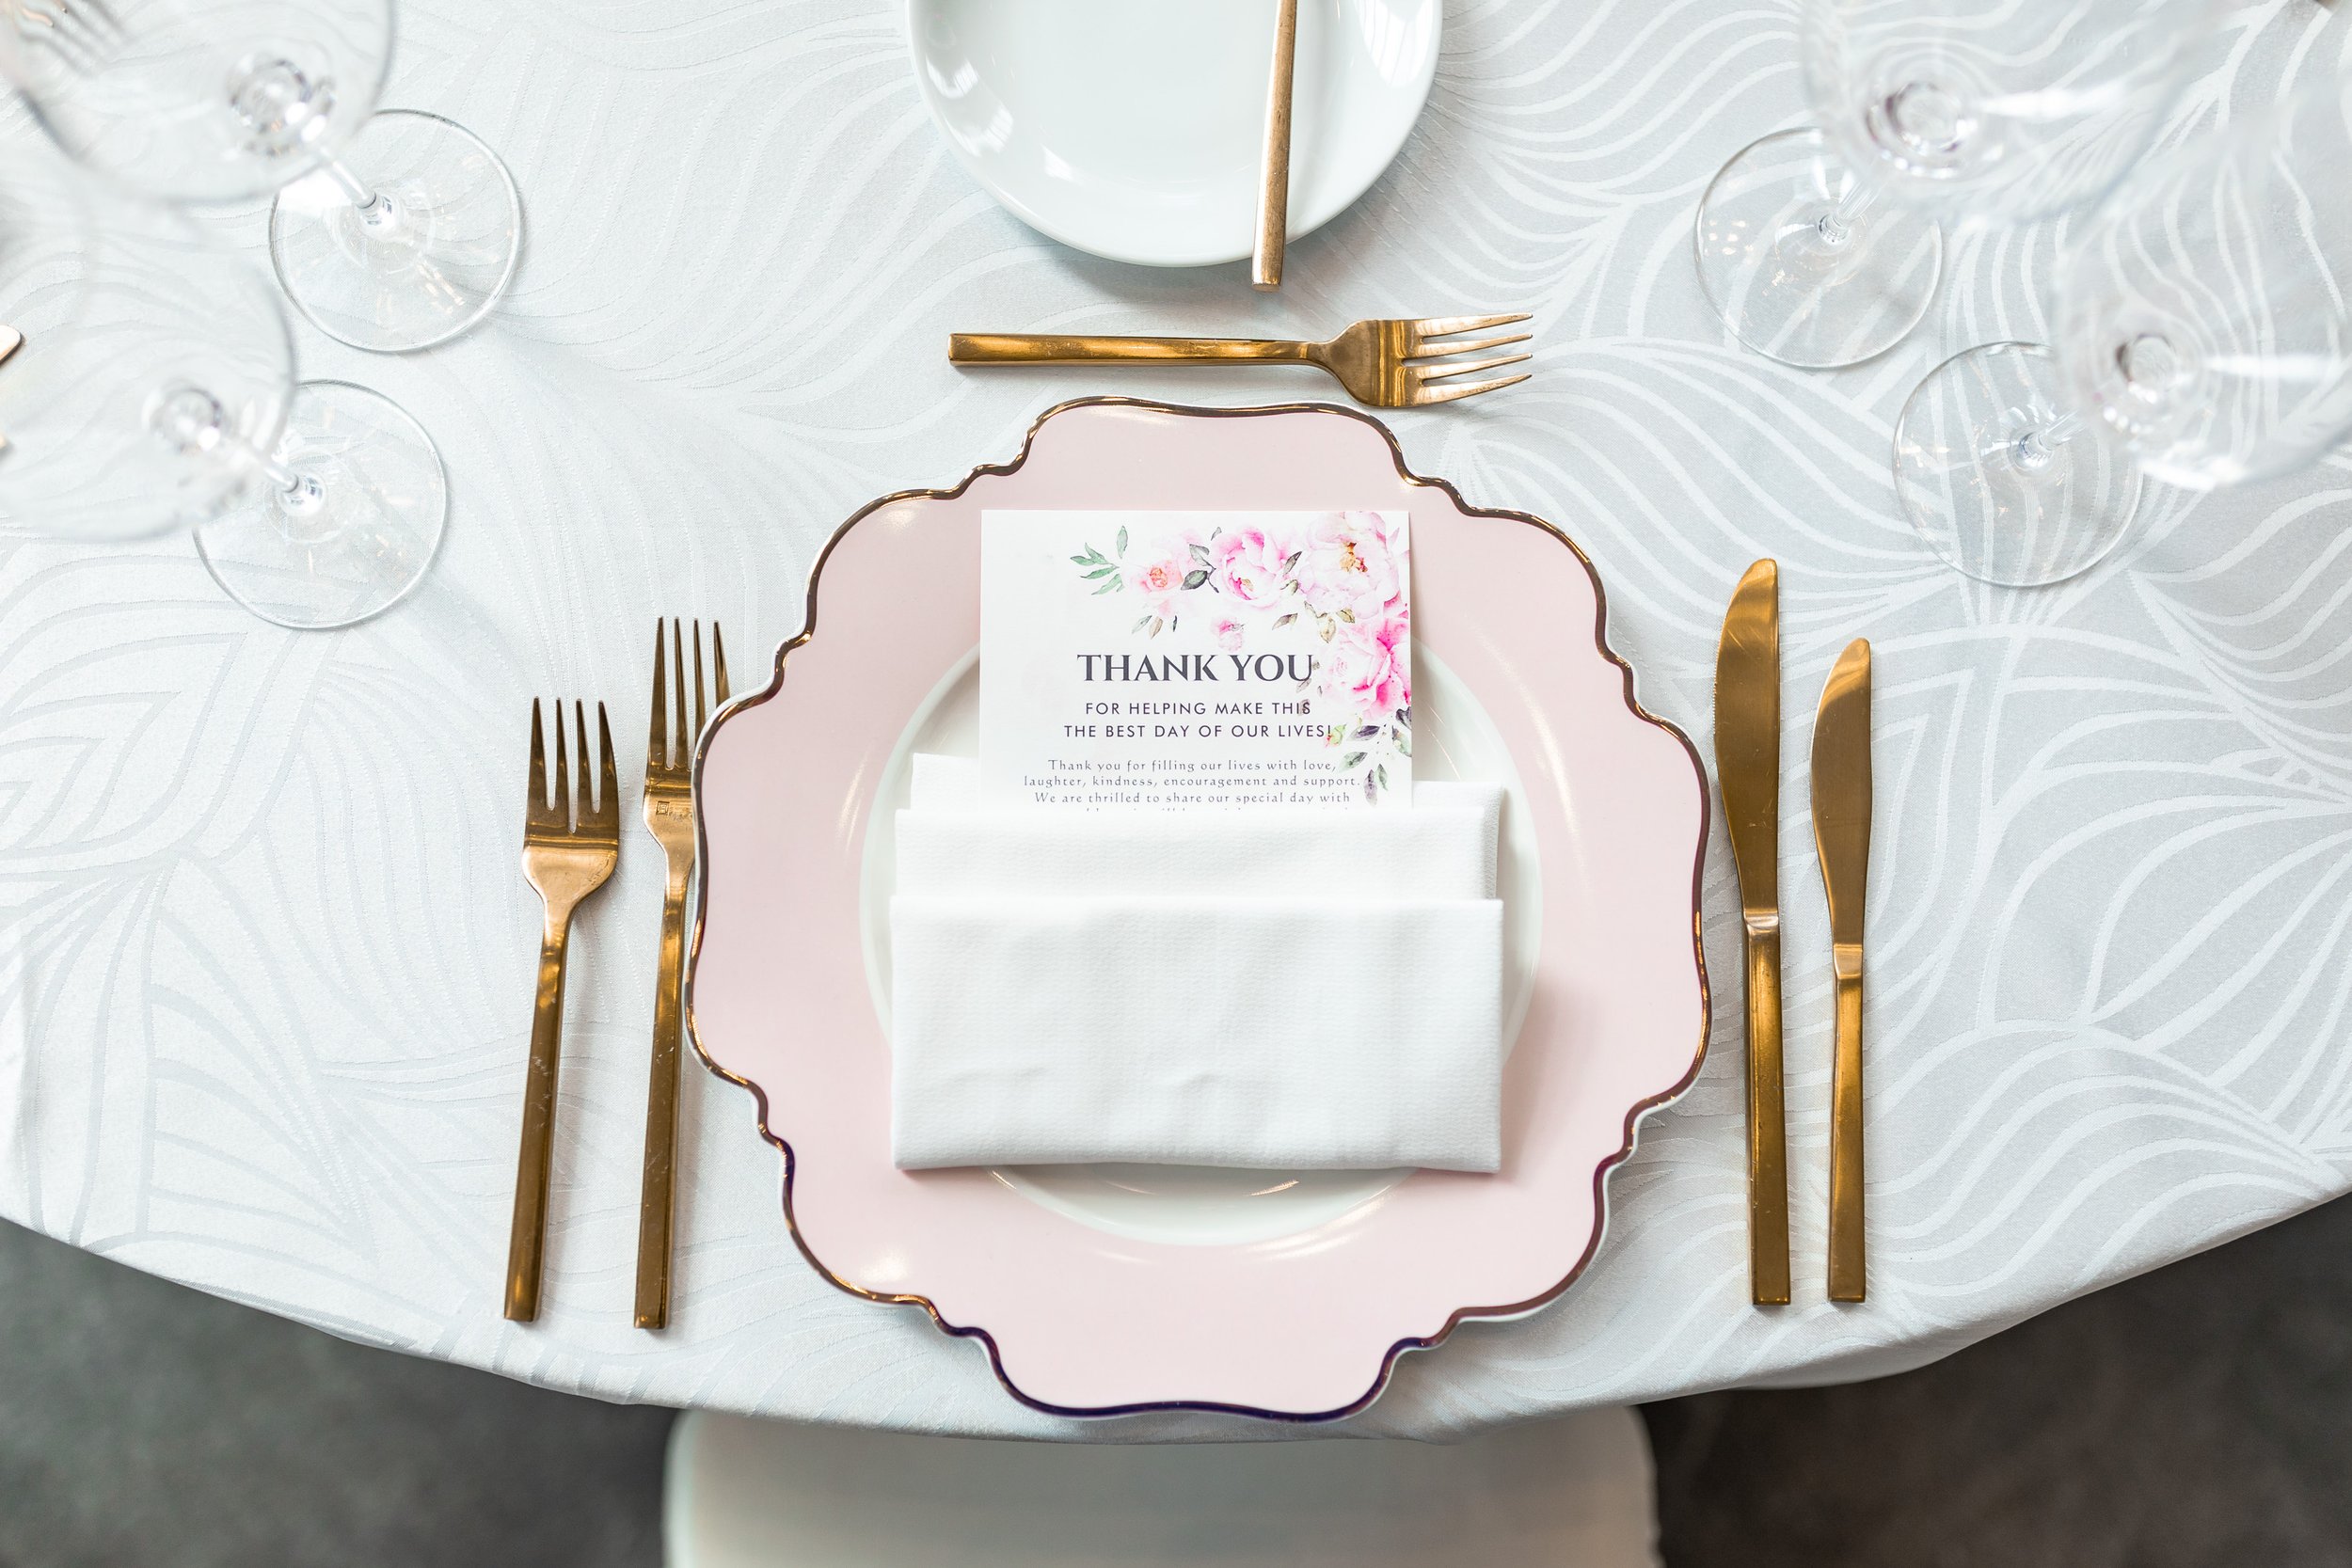 Pink and gold wedding color ideas with table cloth and decor